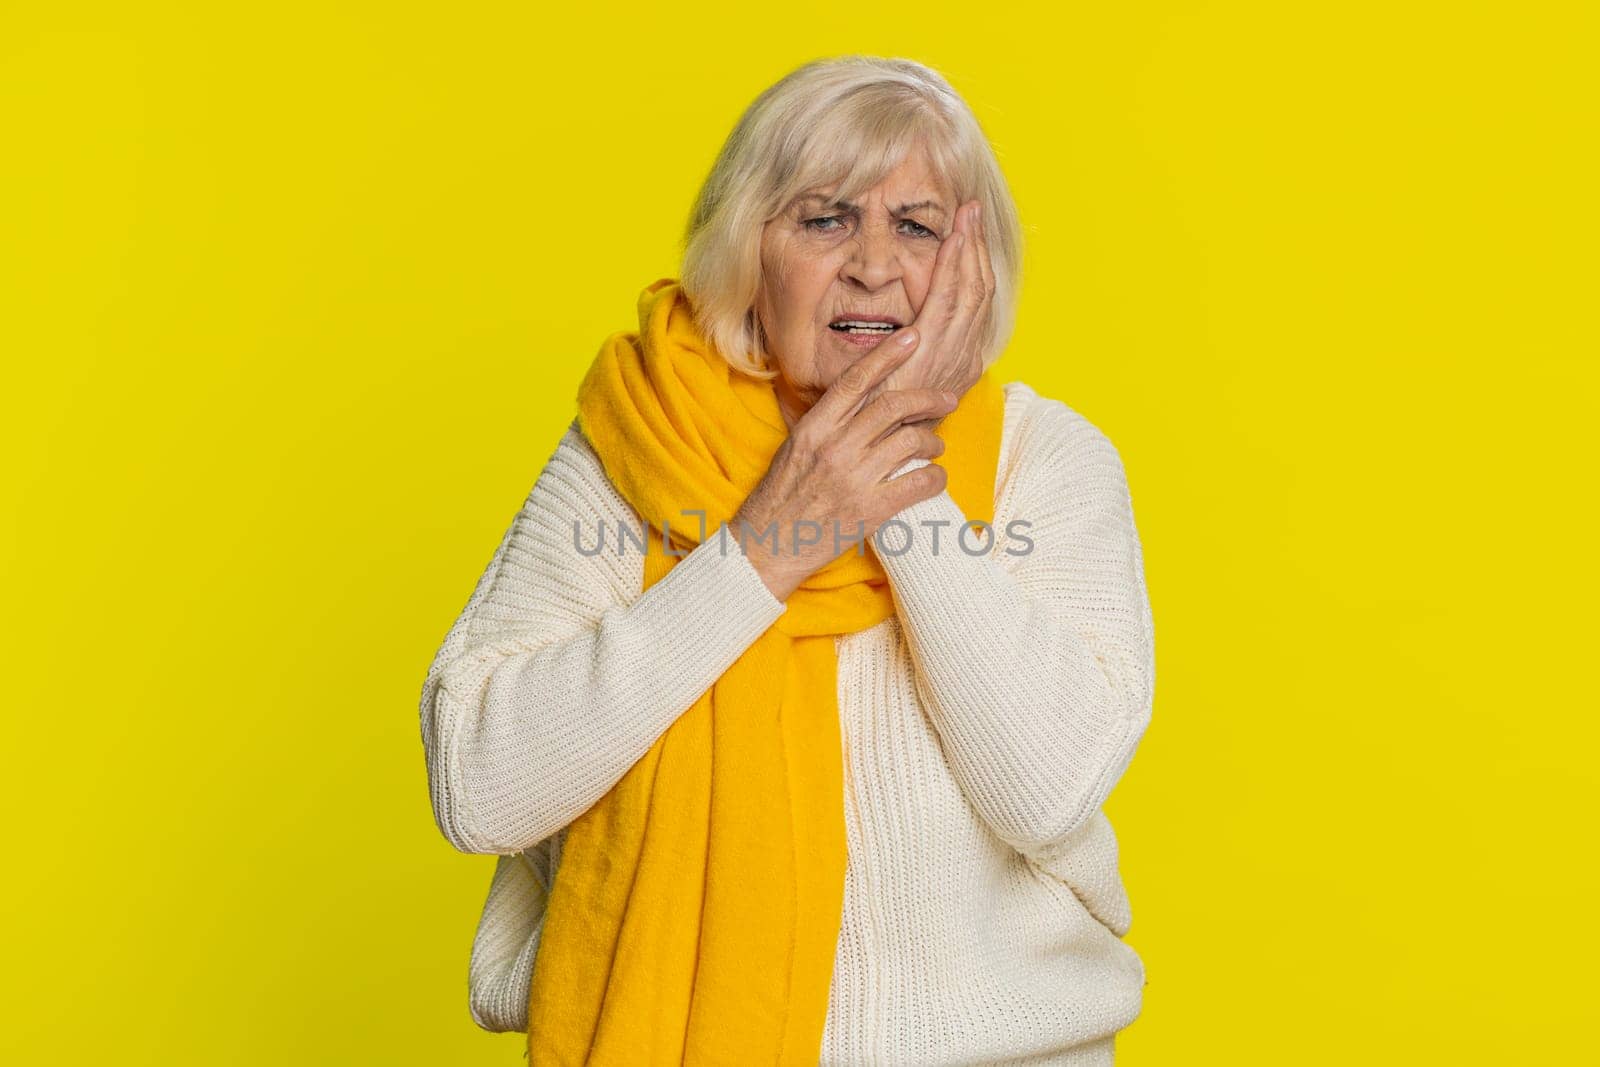 Dental problems. Senior old woman touching cheek, closing eyes with expression of terrible suffer from painful toothache, sensitive teeth, cavities. Mature grandmother pensioner on yellow background